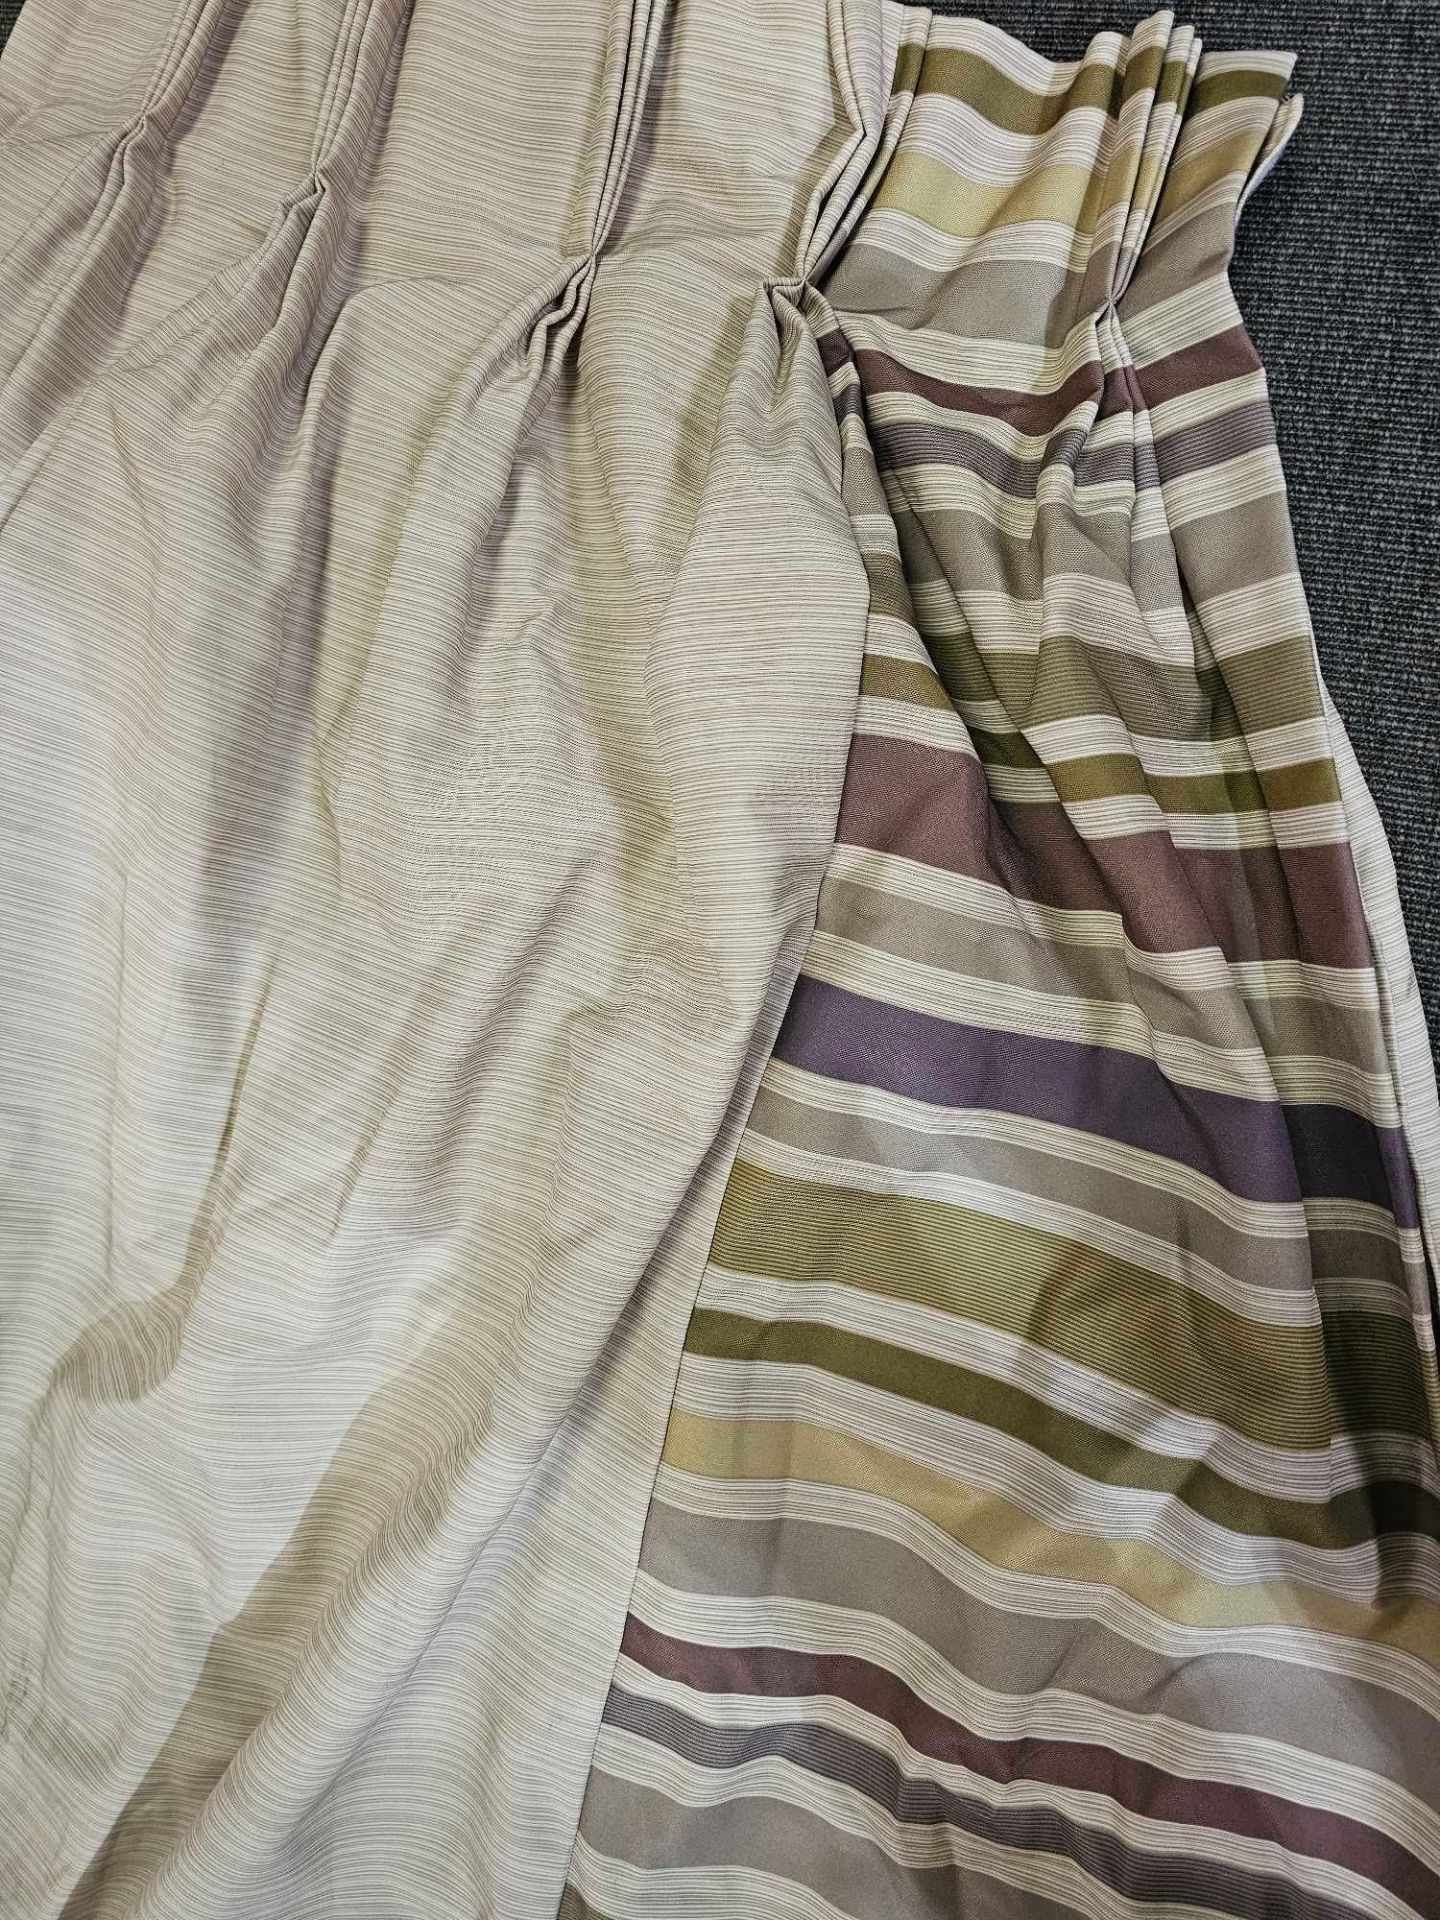 A Pair Of Curtains Striped Edge Purple/Green/Beige/Lime/Brown Size 284 x 250cm ( Ref Red 162) - Image 2 of 2